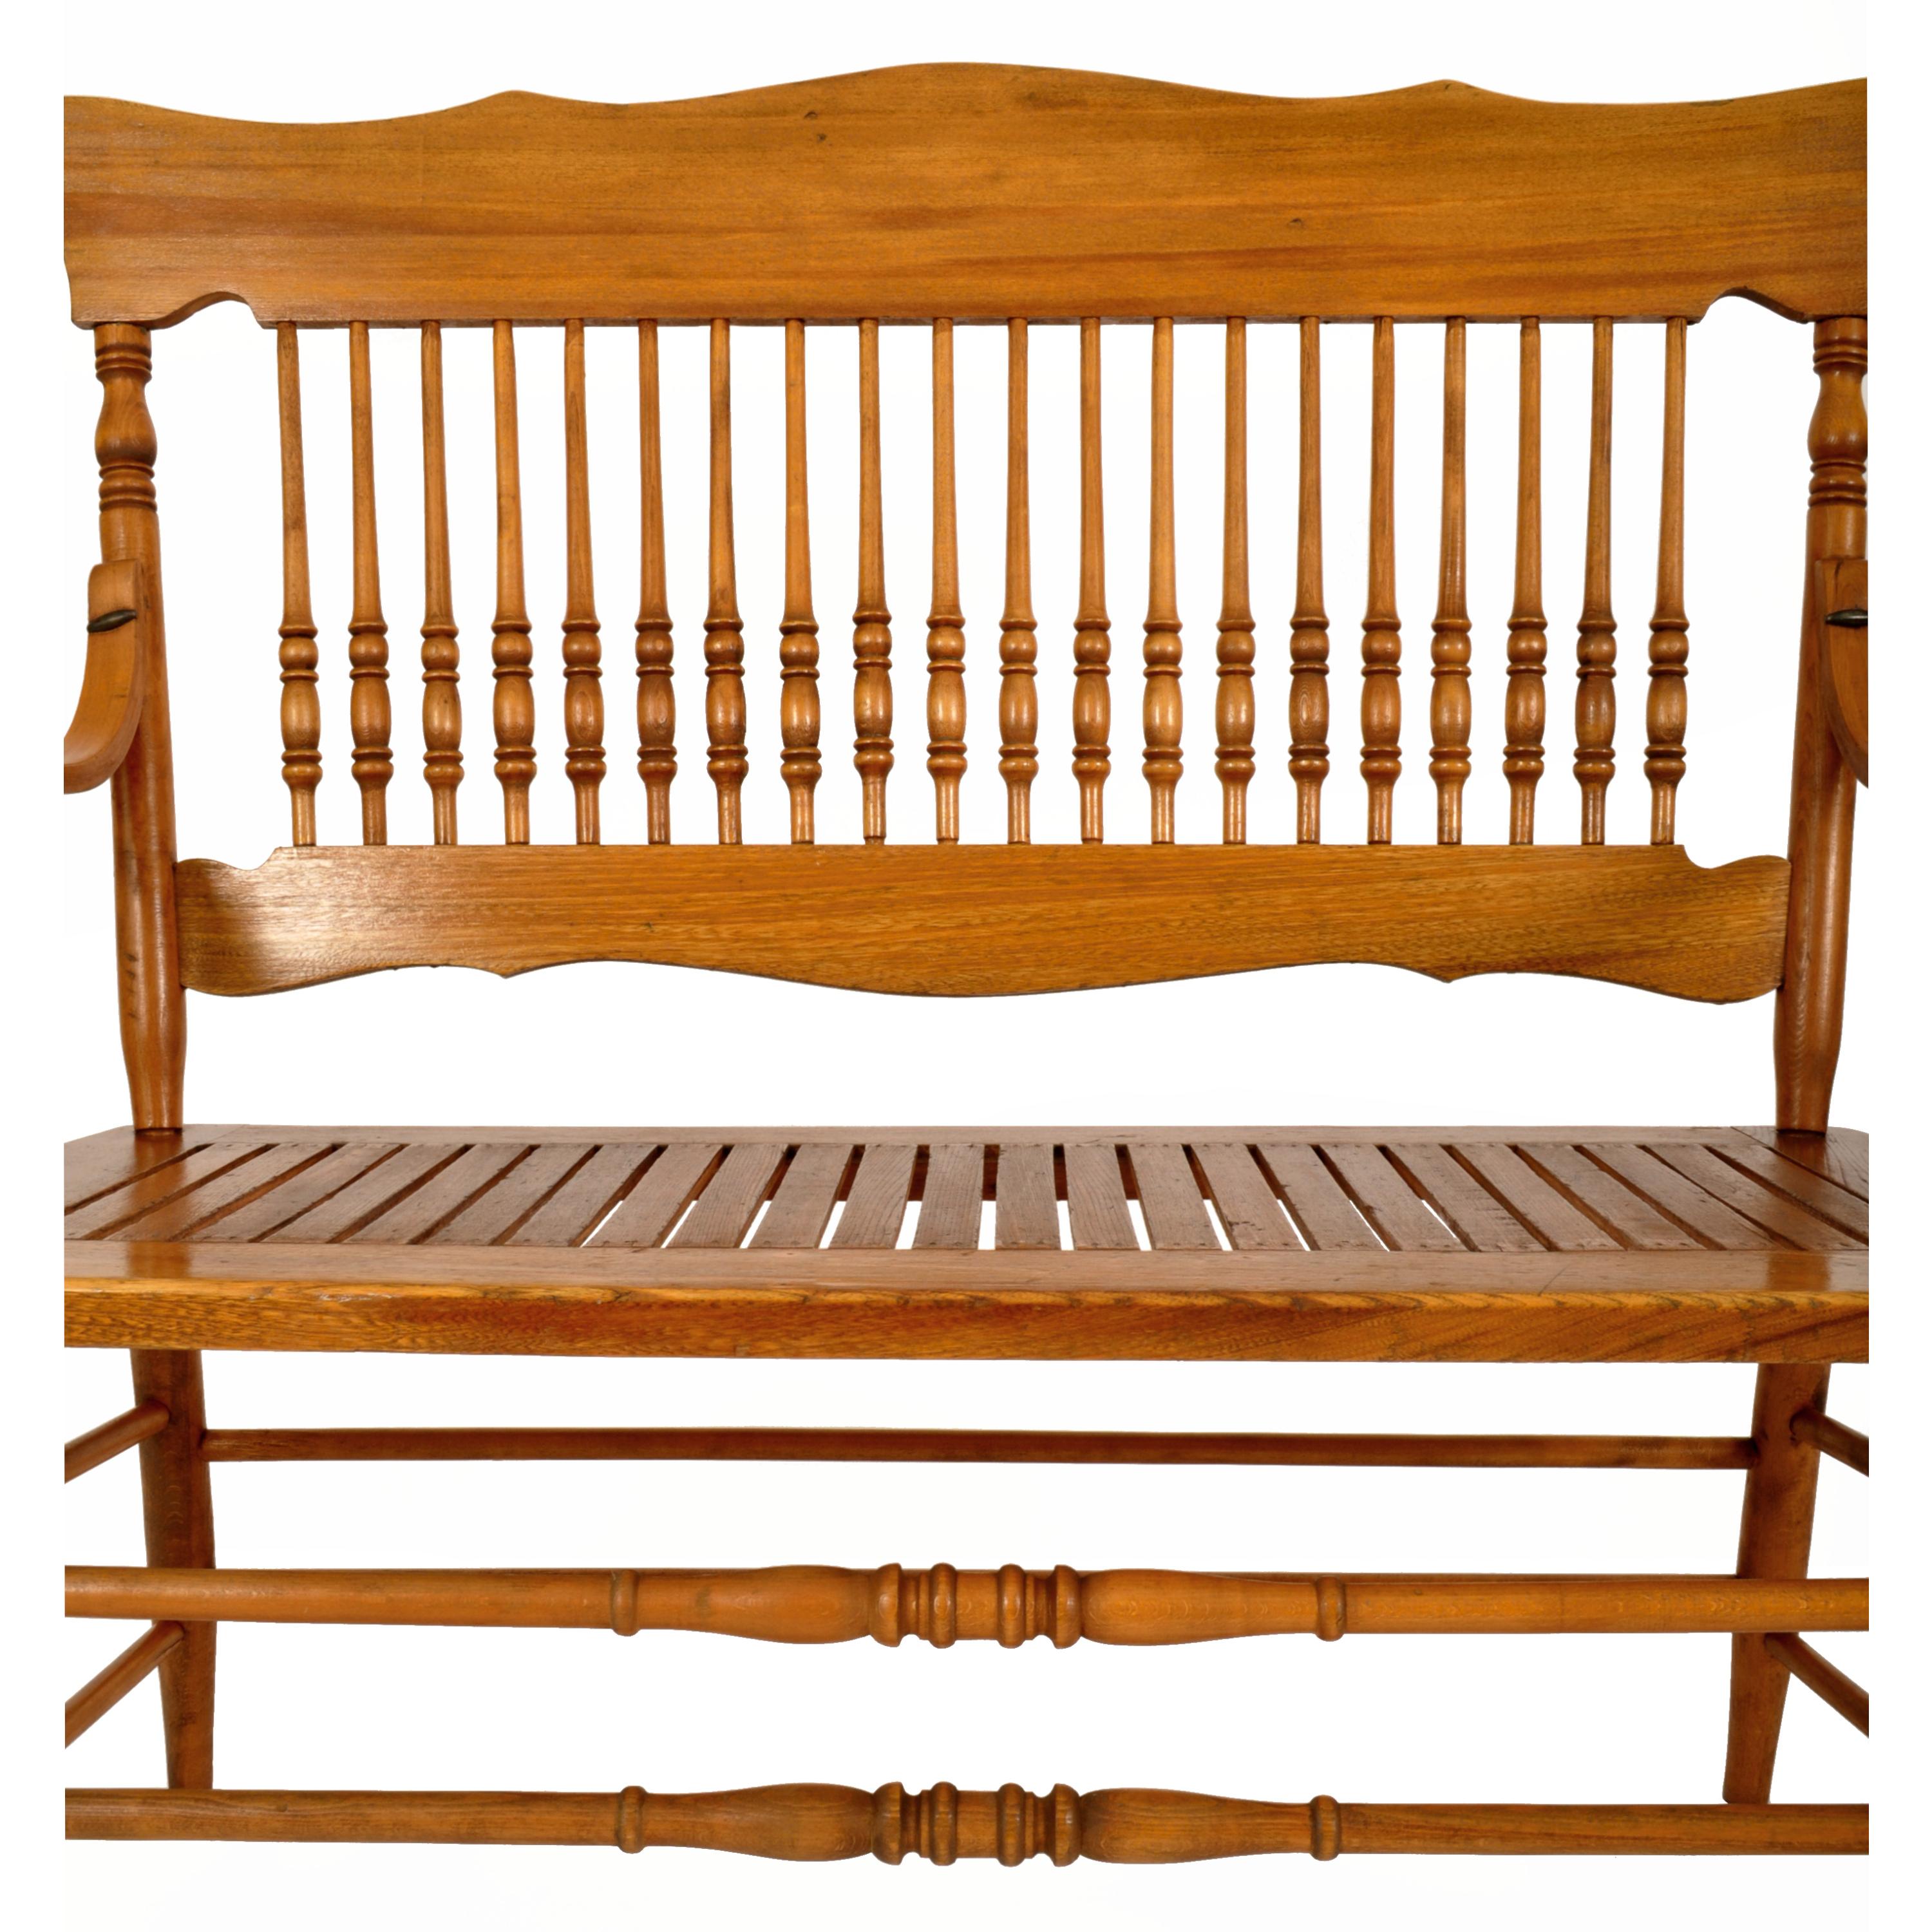 American Colonial Antique American Windsor Maple Spindle Back Colonial Deacons Bench Loveseat 1880